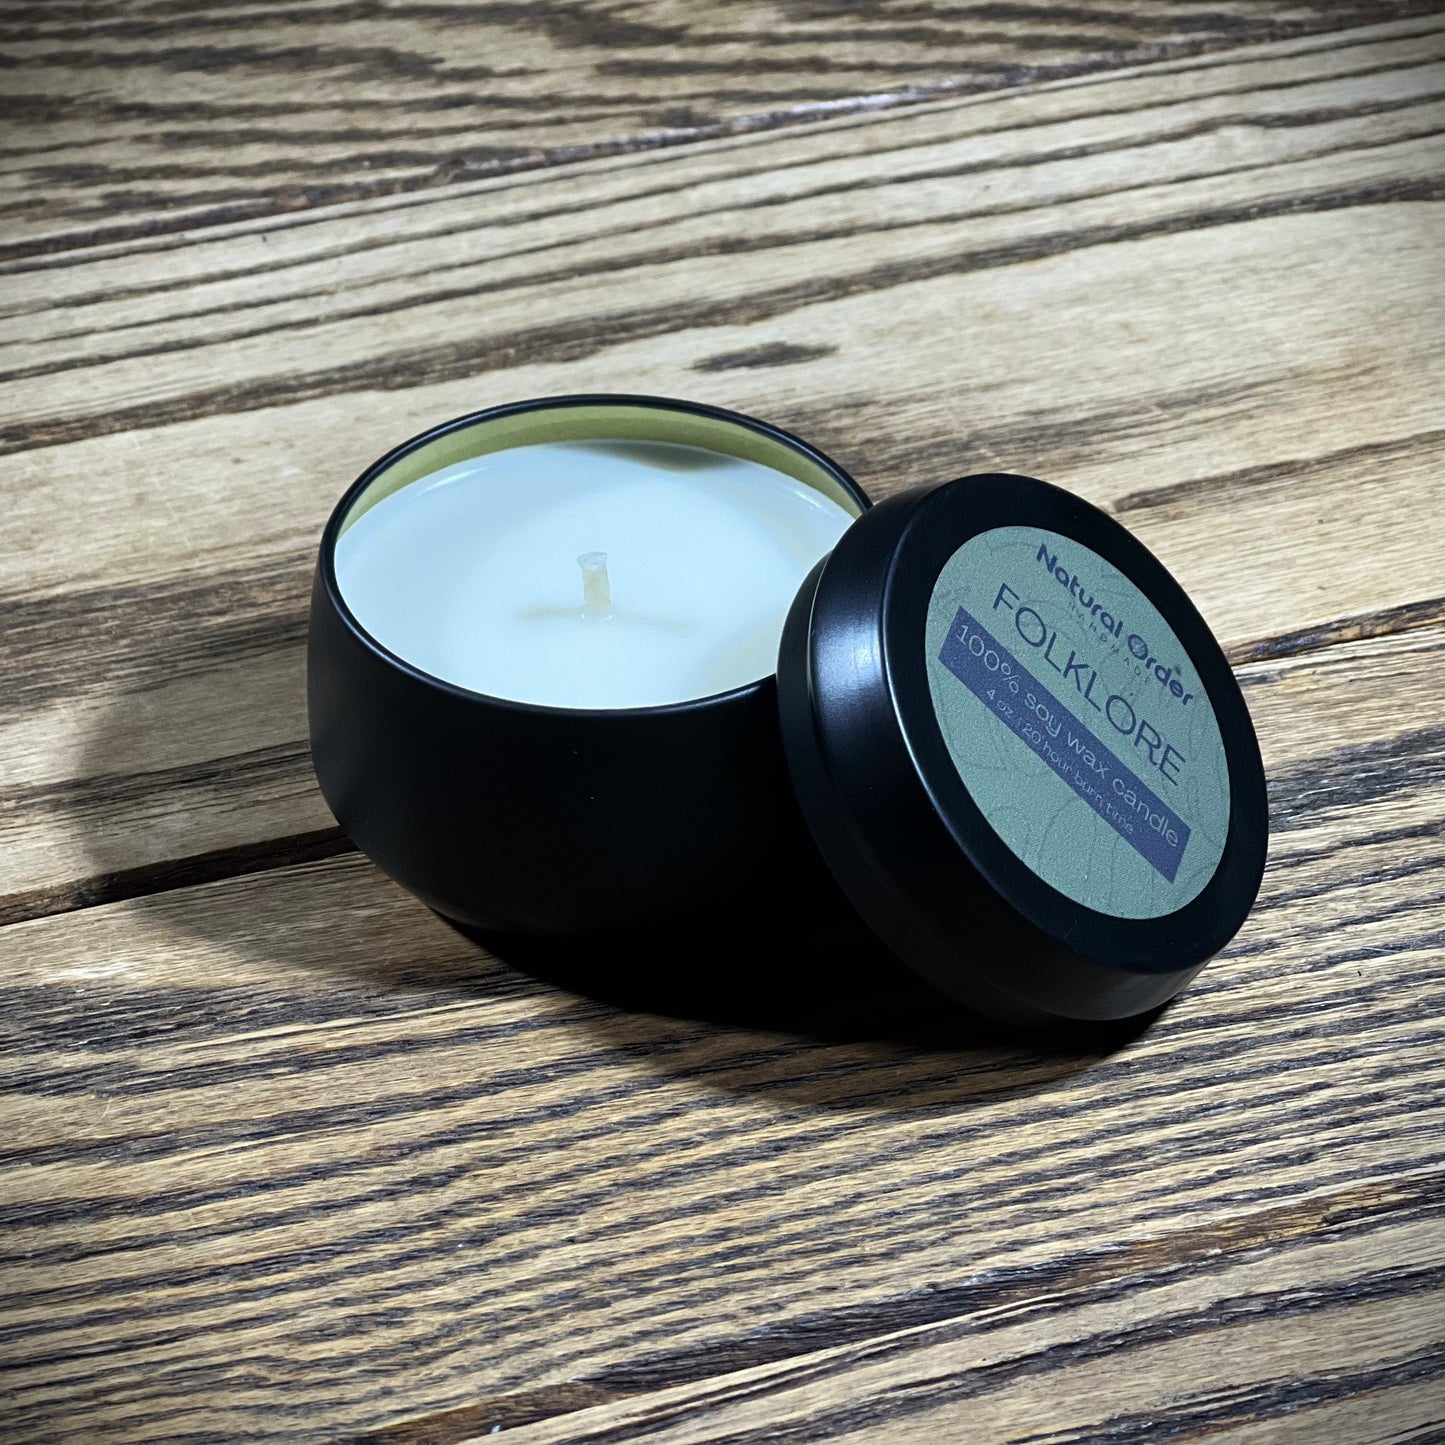 Folklore Soy Candle 4 ounce